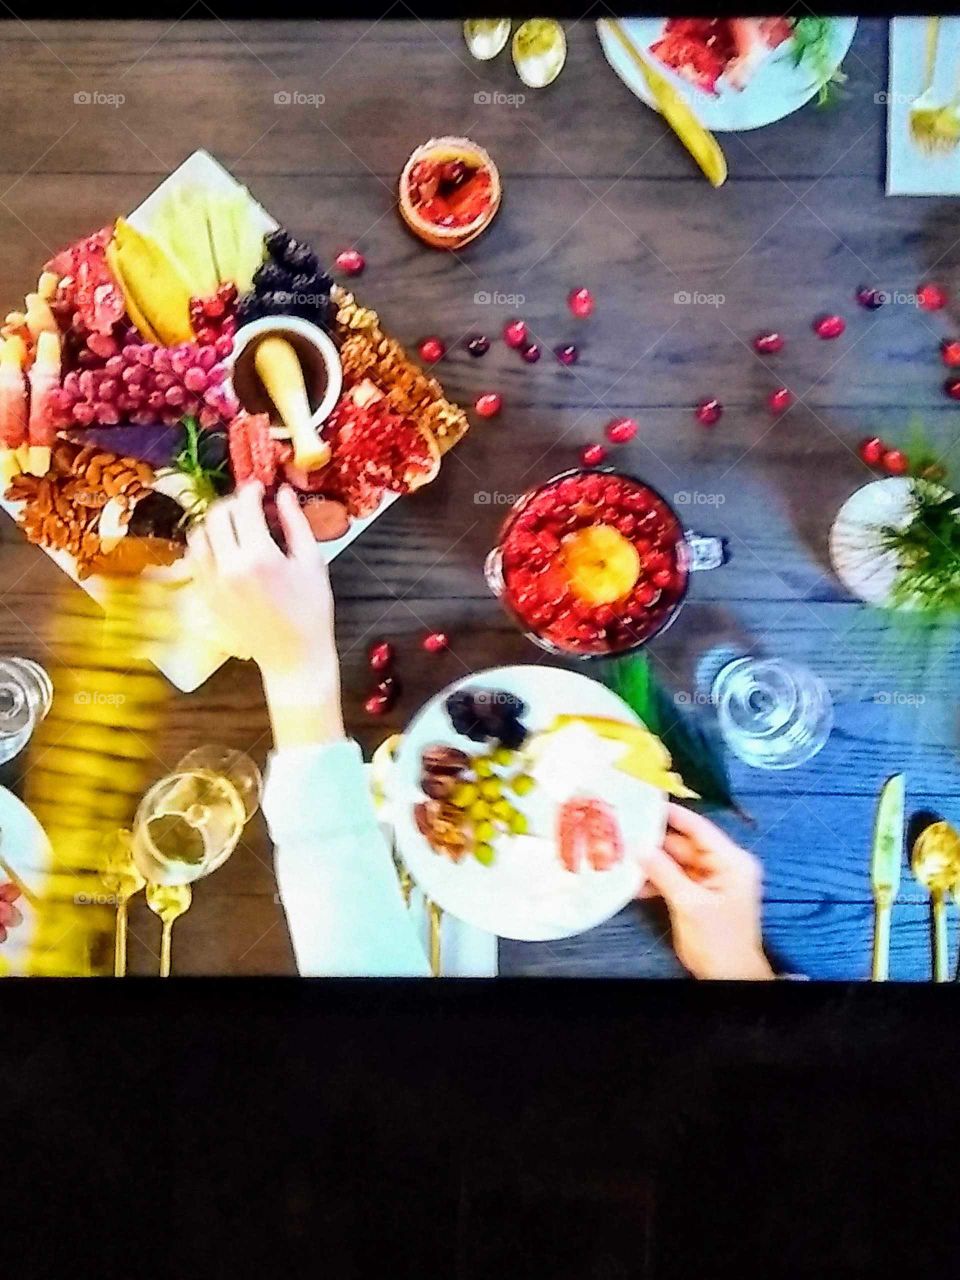 fixing a party tray of fruit